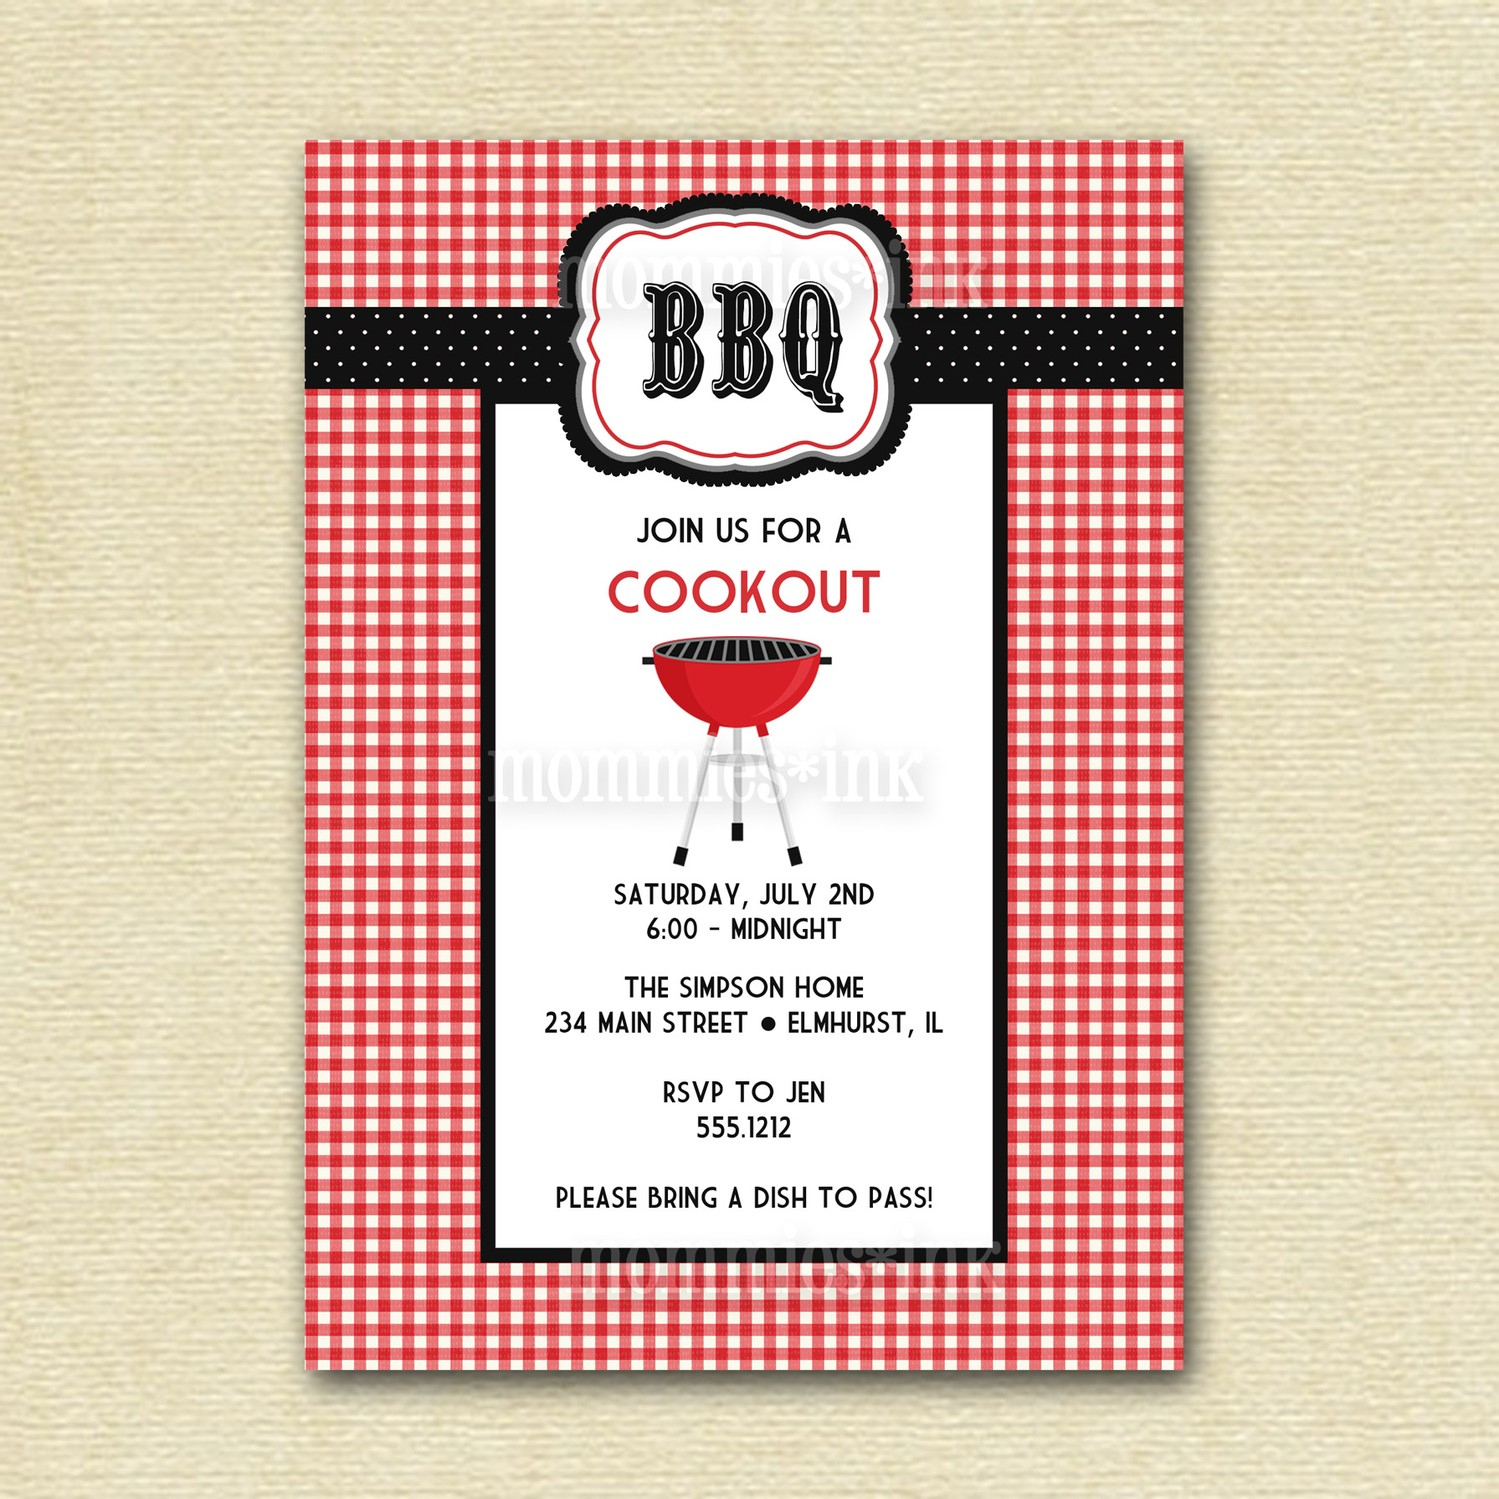 16 Free Printable Cookout Invitations Template Images - Free Cookout - Free Printable Cookout Invitations